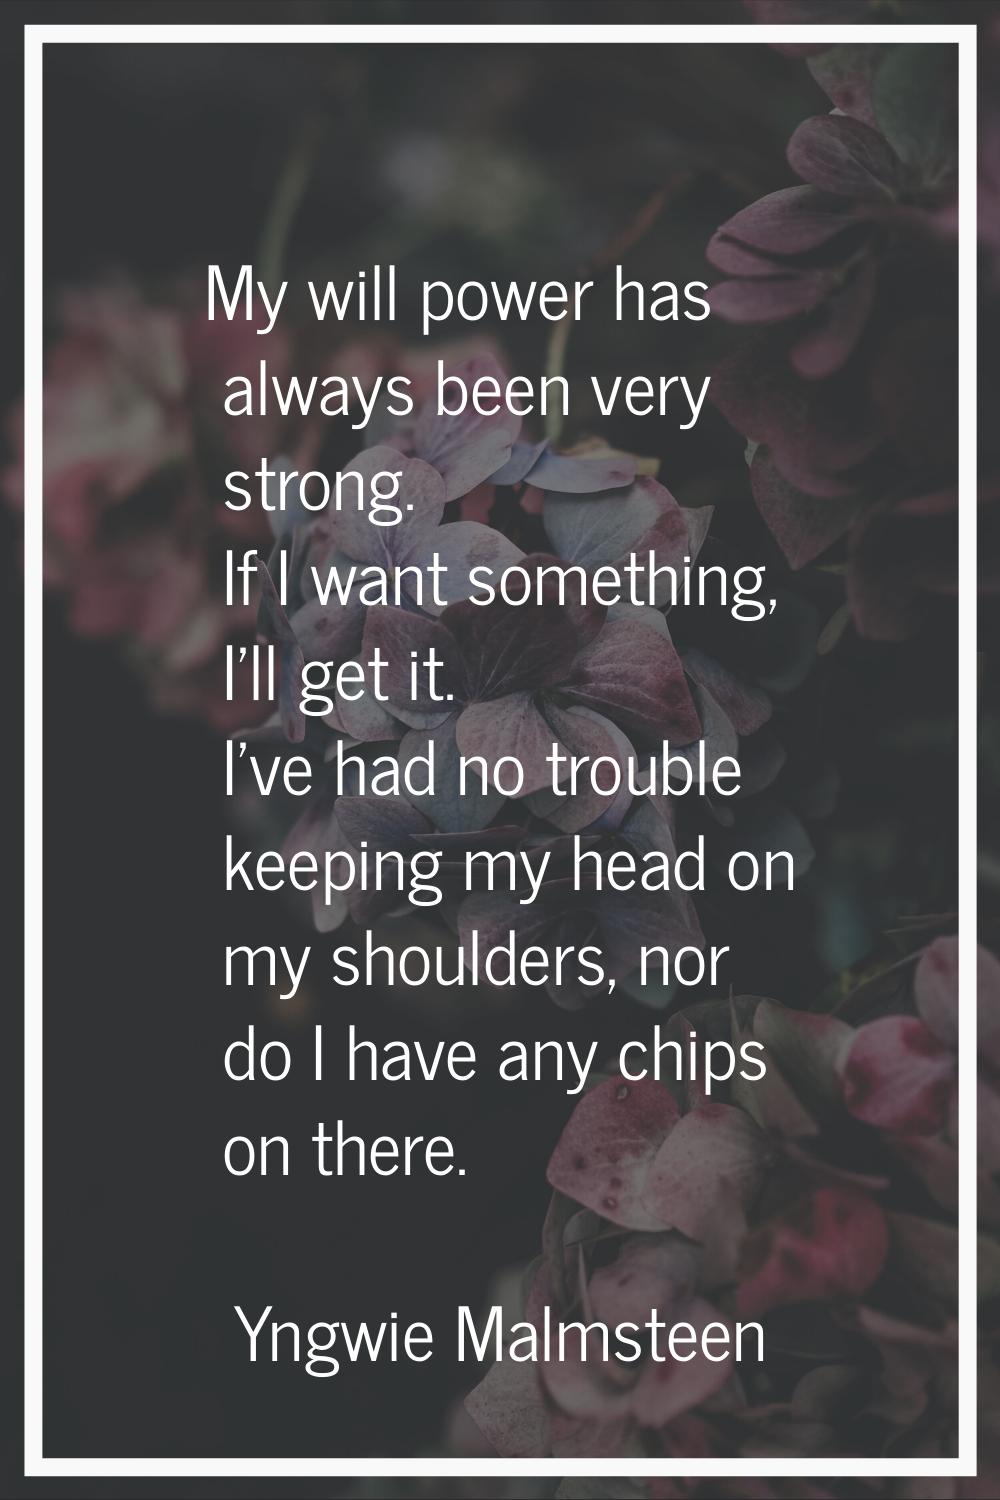 My will power has always been very strong. If I want something, I'll get it. I've had no trouble ke